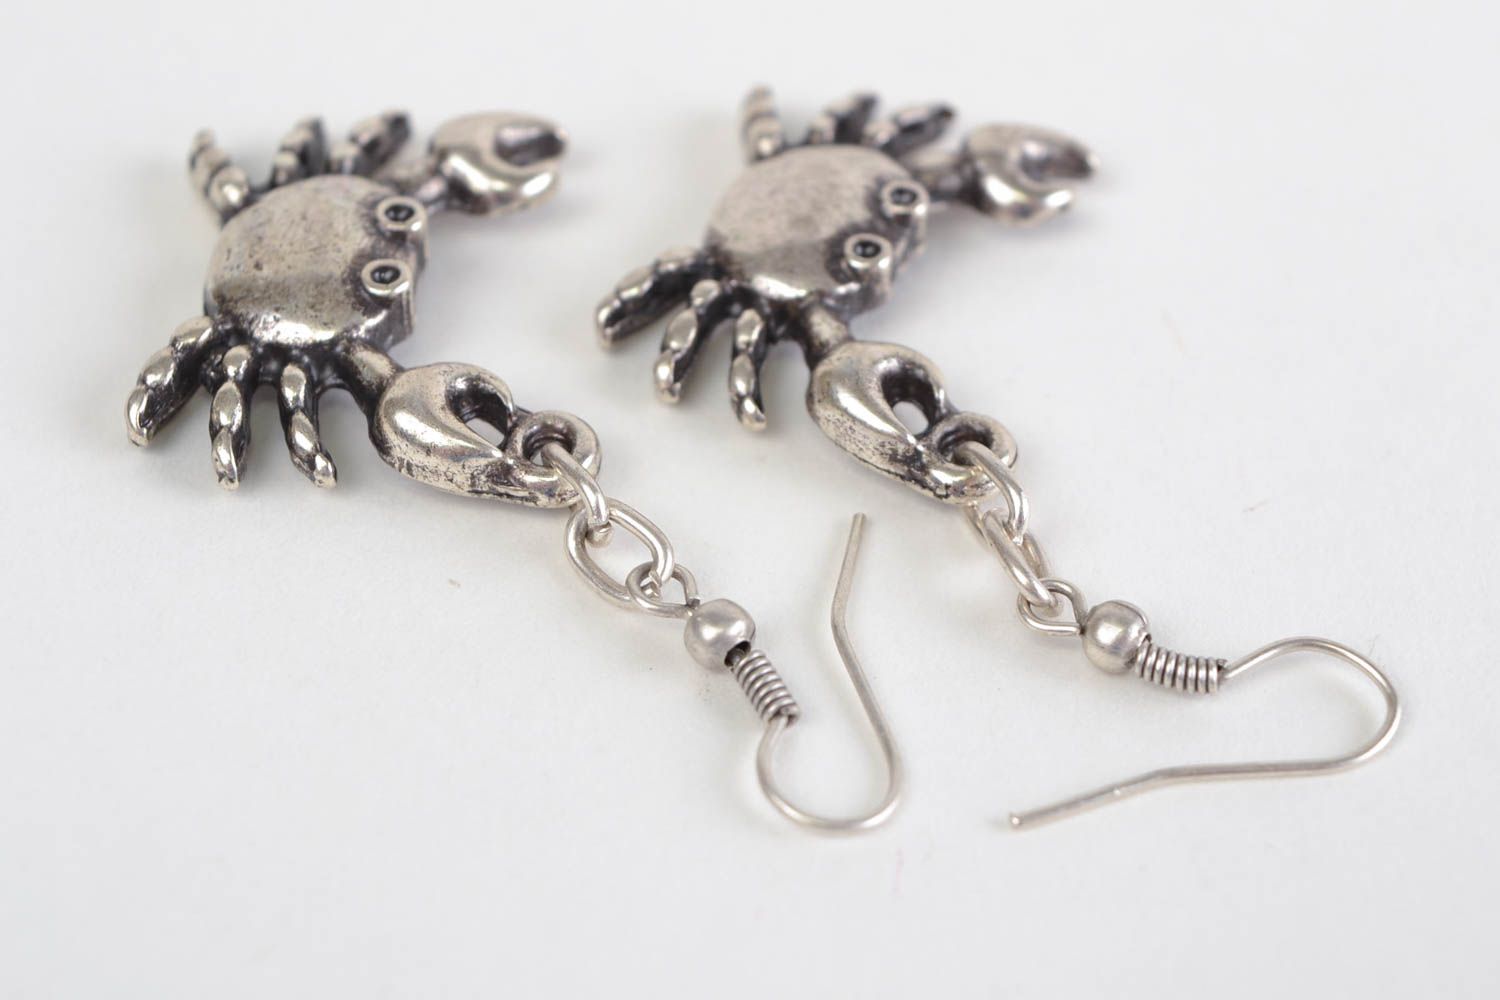 Small stylish handmade designer metal earrings in the shape of crabs photo 3